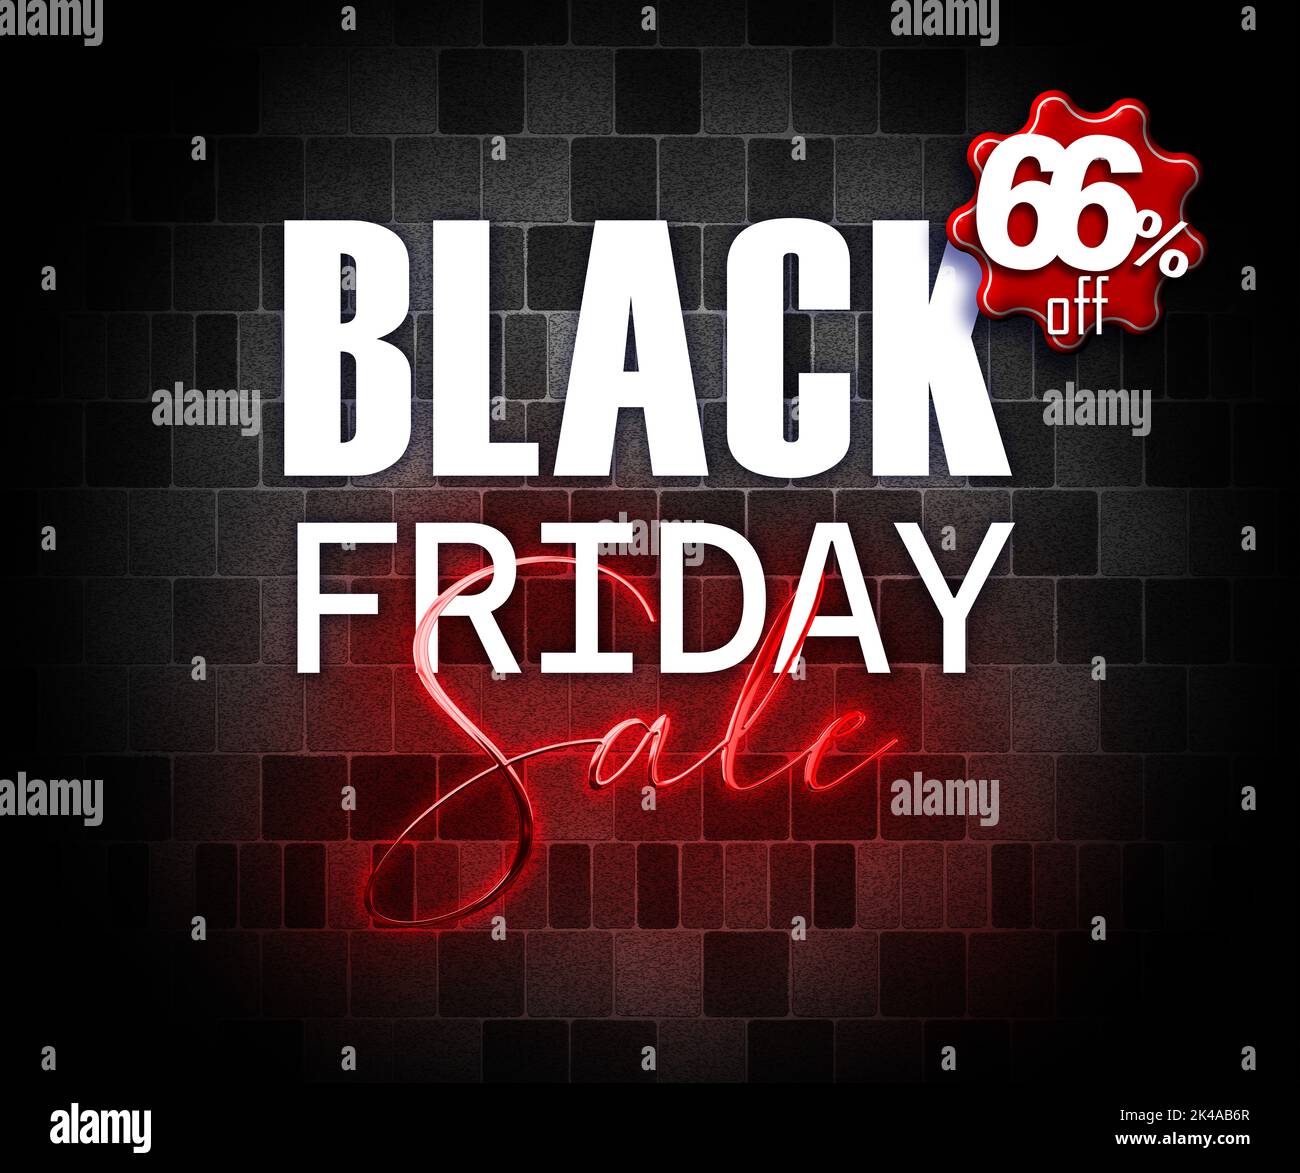 illustration with 3d elements black friday promotion banner 66 percent off sales increase Stock Photo